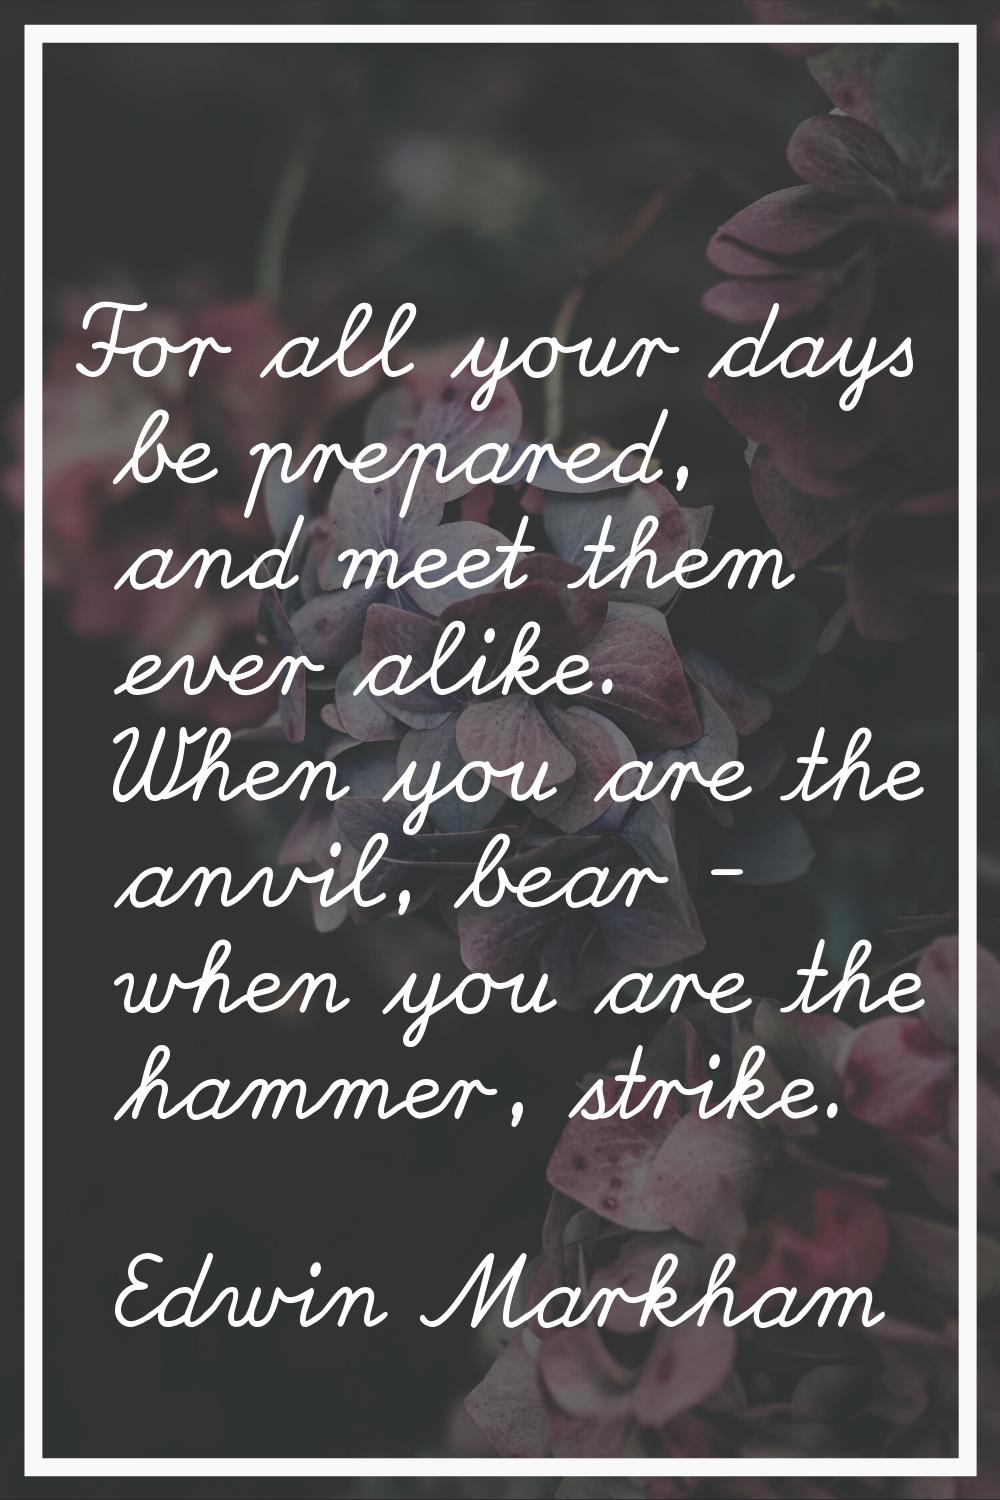 For all your days be prepared, and meet them ever alike. When you are the anvil, bear - when you ar